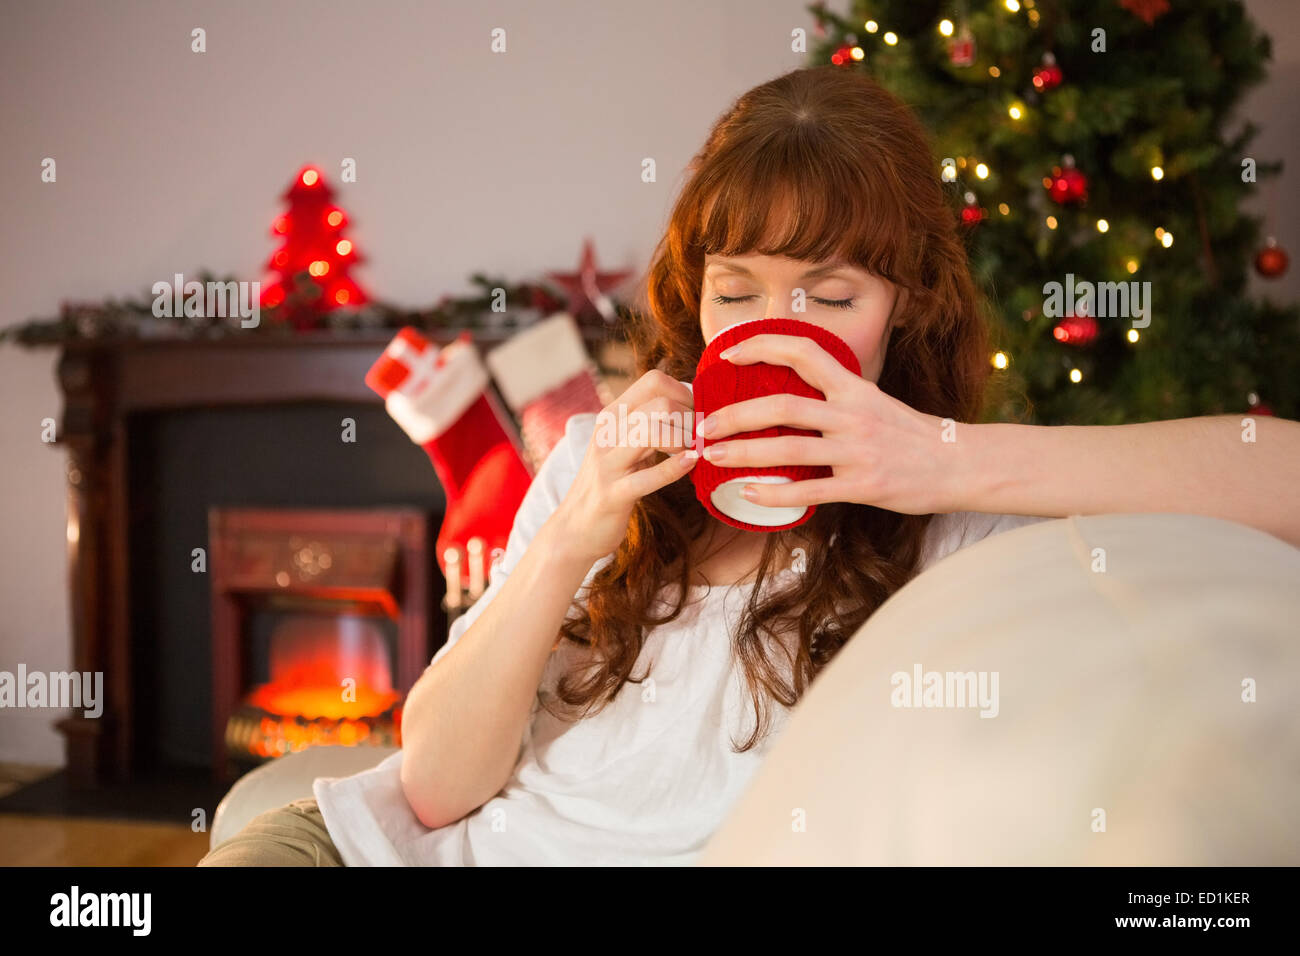 Pretty redhead sitting on couch drinking hot chocolate Stock Photo